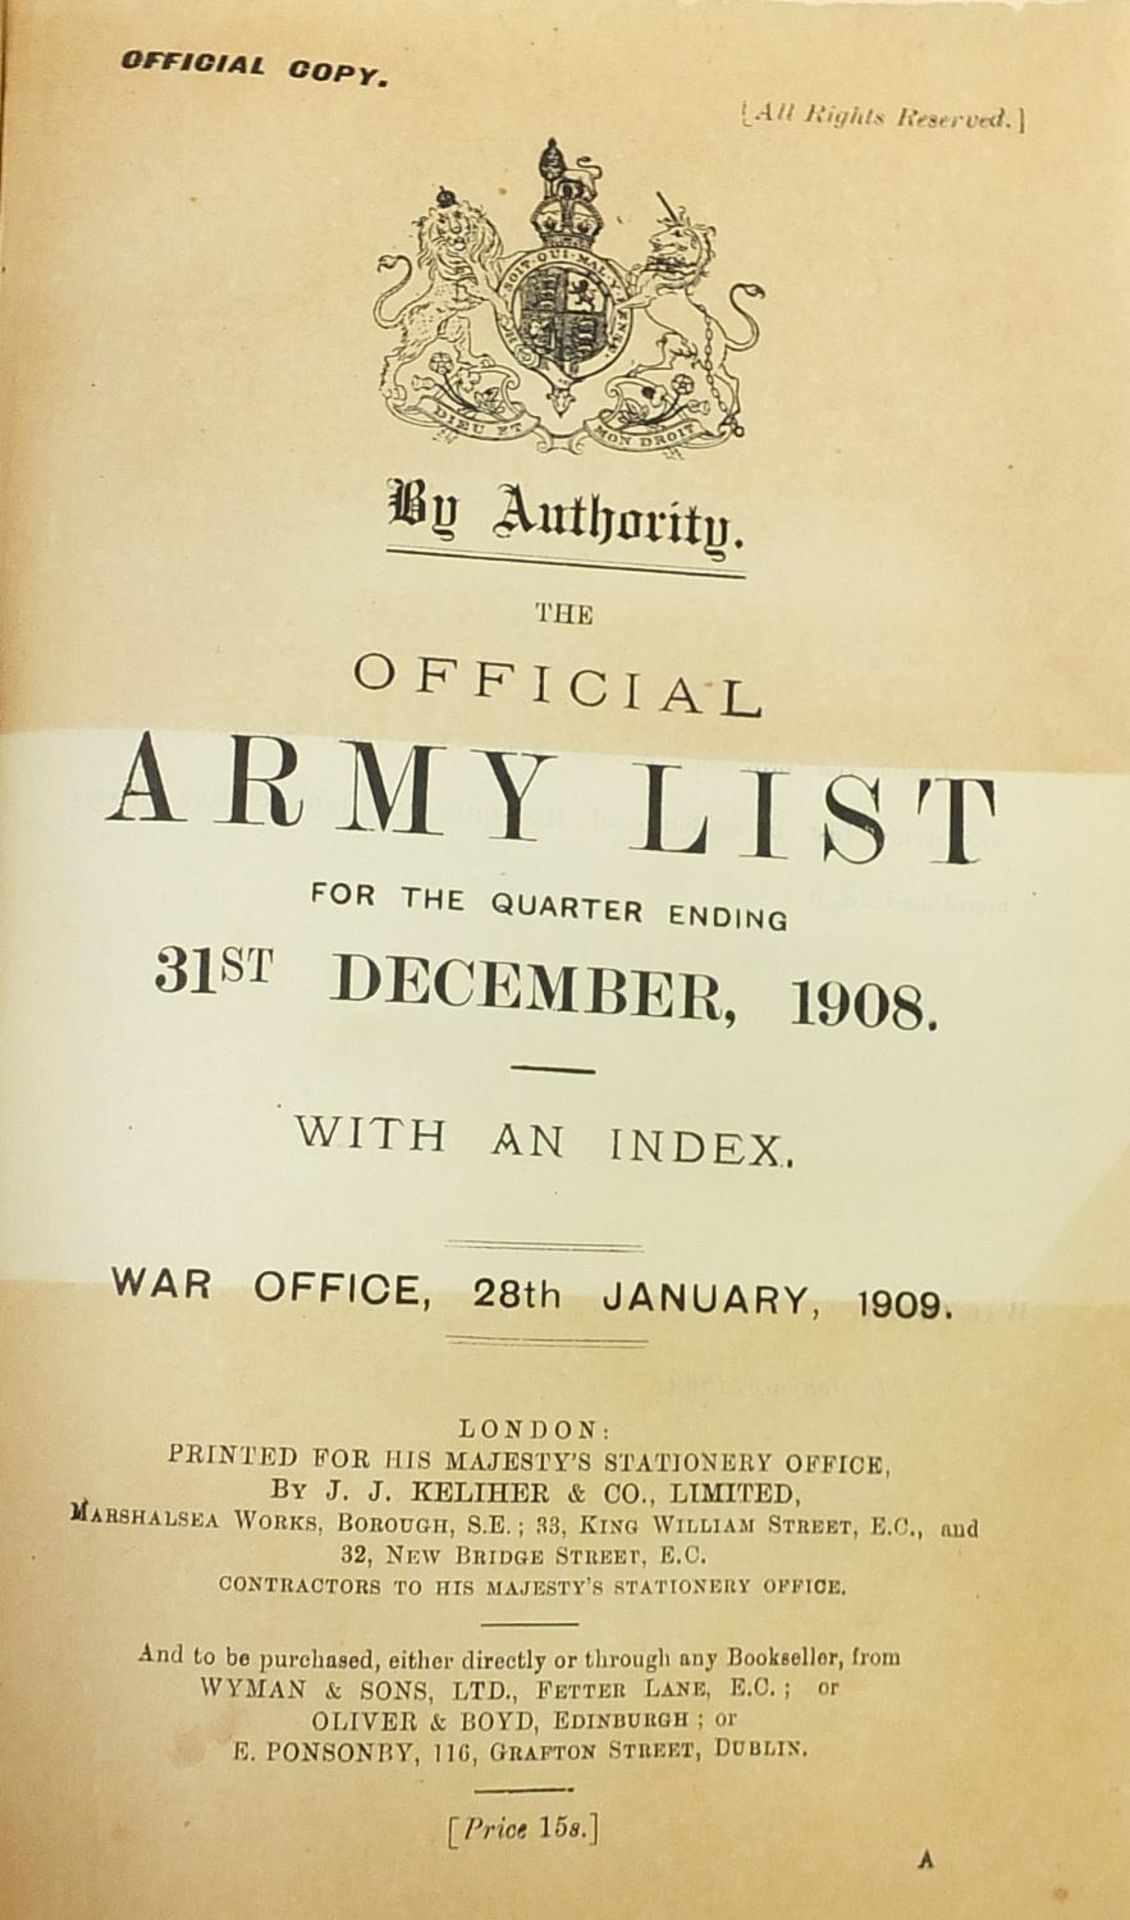 Military interest hardback books including The Official Army List with an index and Hart's Annual - Image 3 of 3